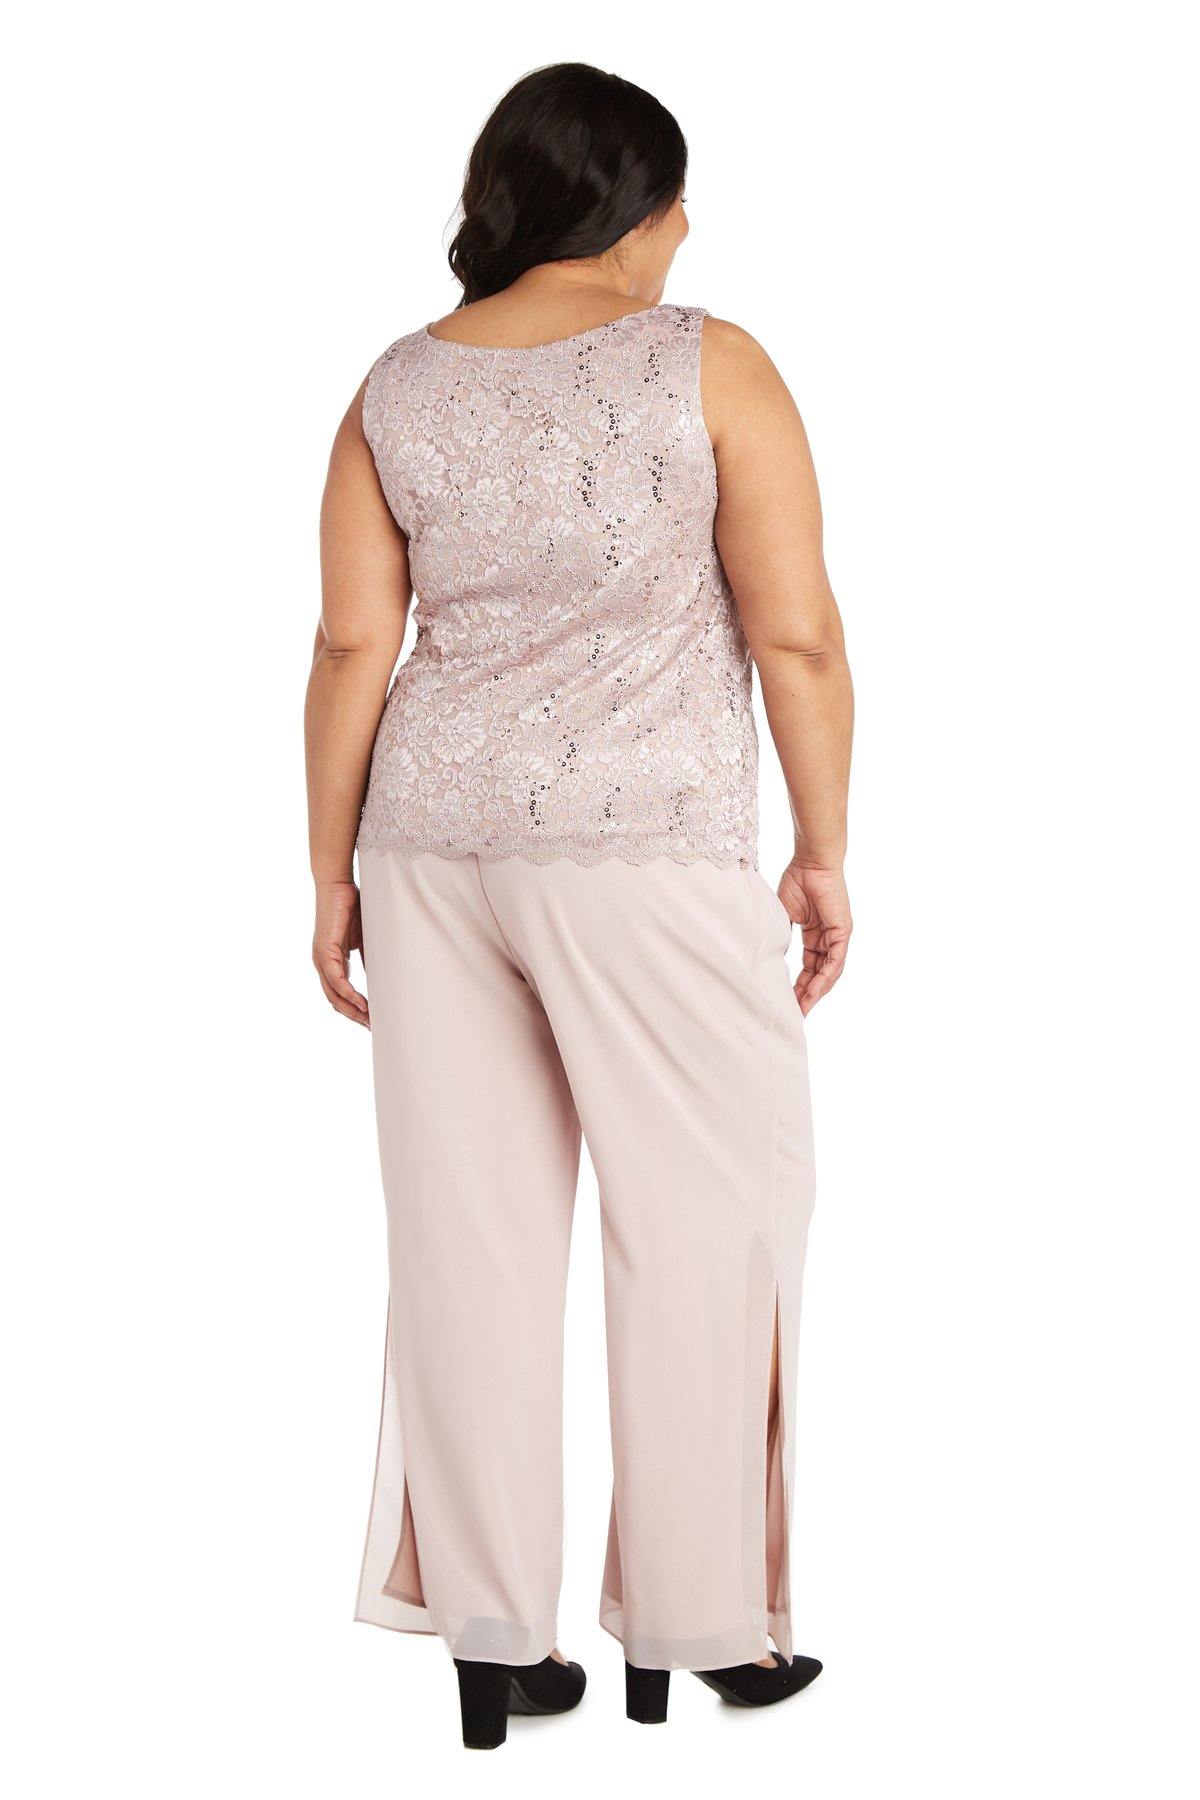 R&M Richards 7506 Mother Of The Bride Pant Suit for $39.99 – The Dress  Outlet